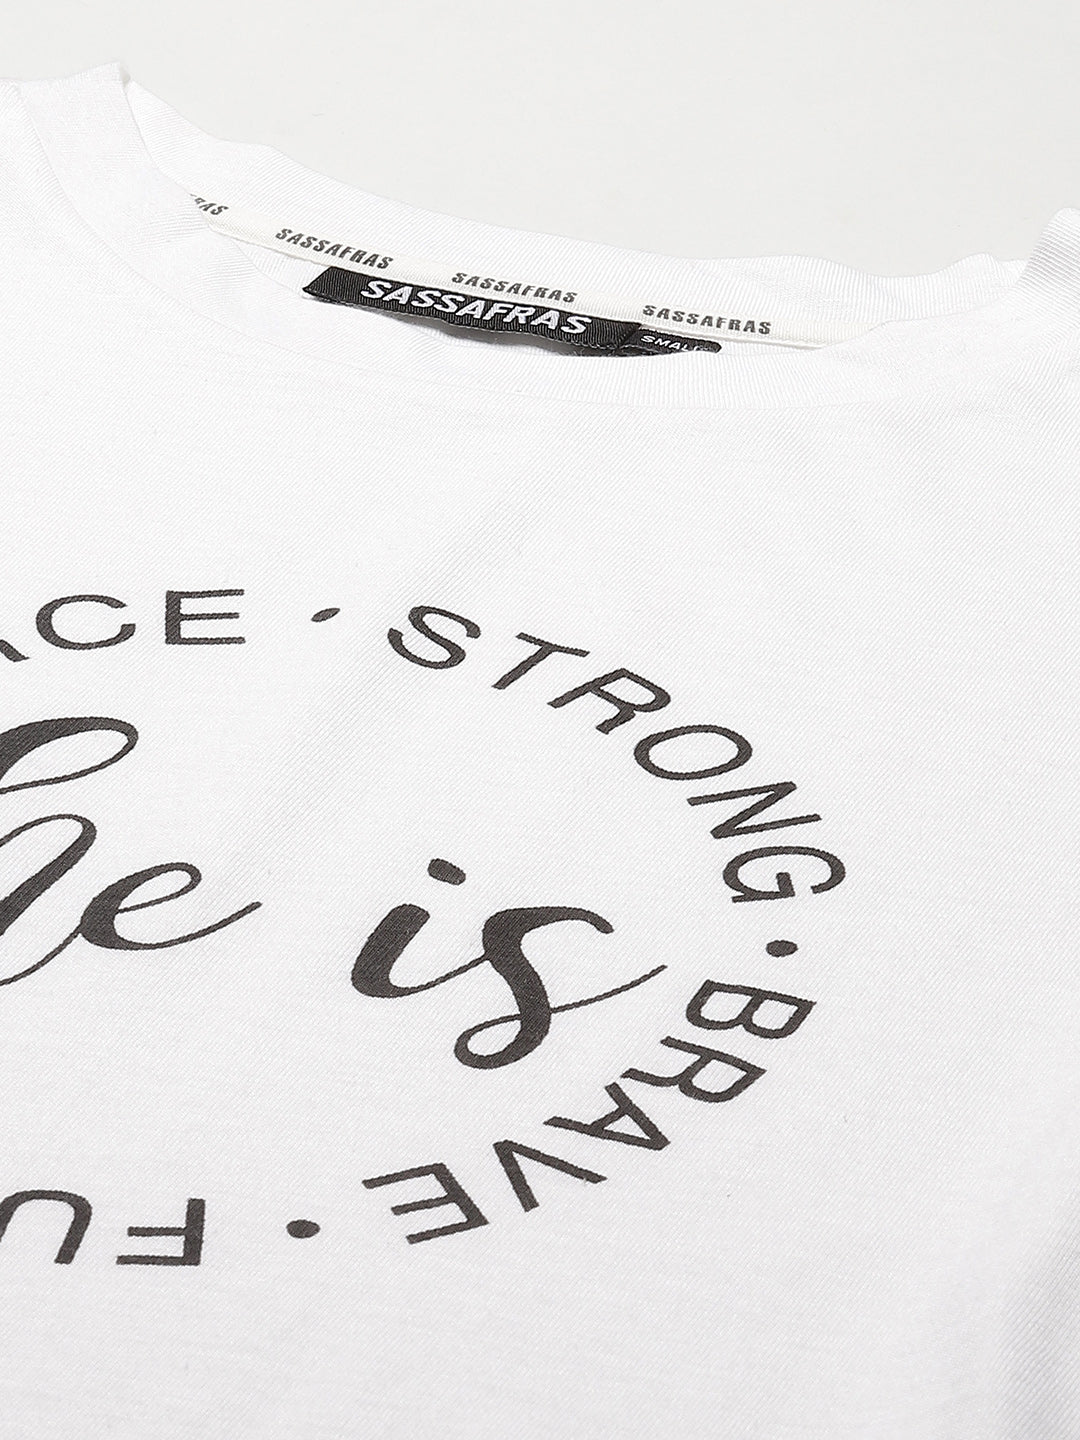 White SHE IS STRONG Print Round Neck T-Shirt